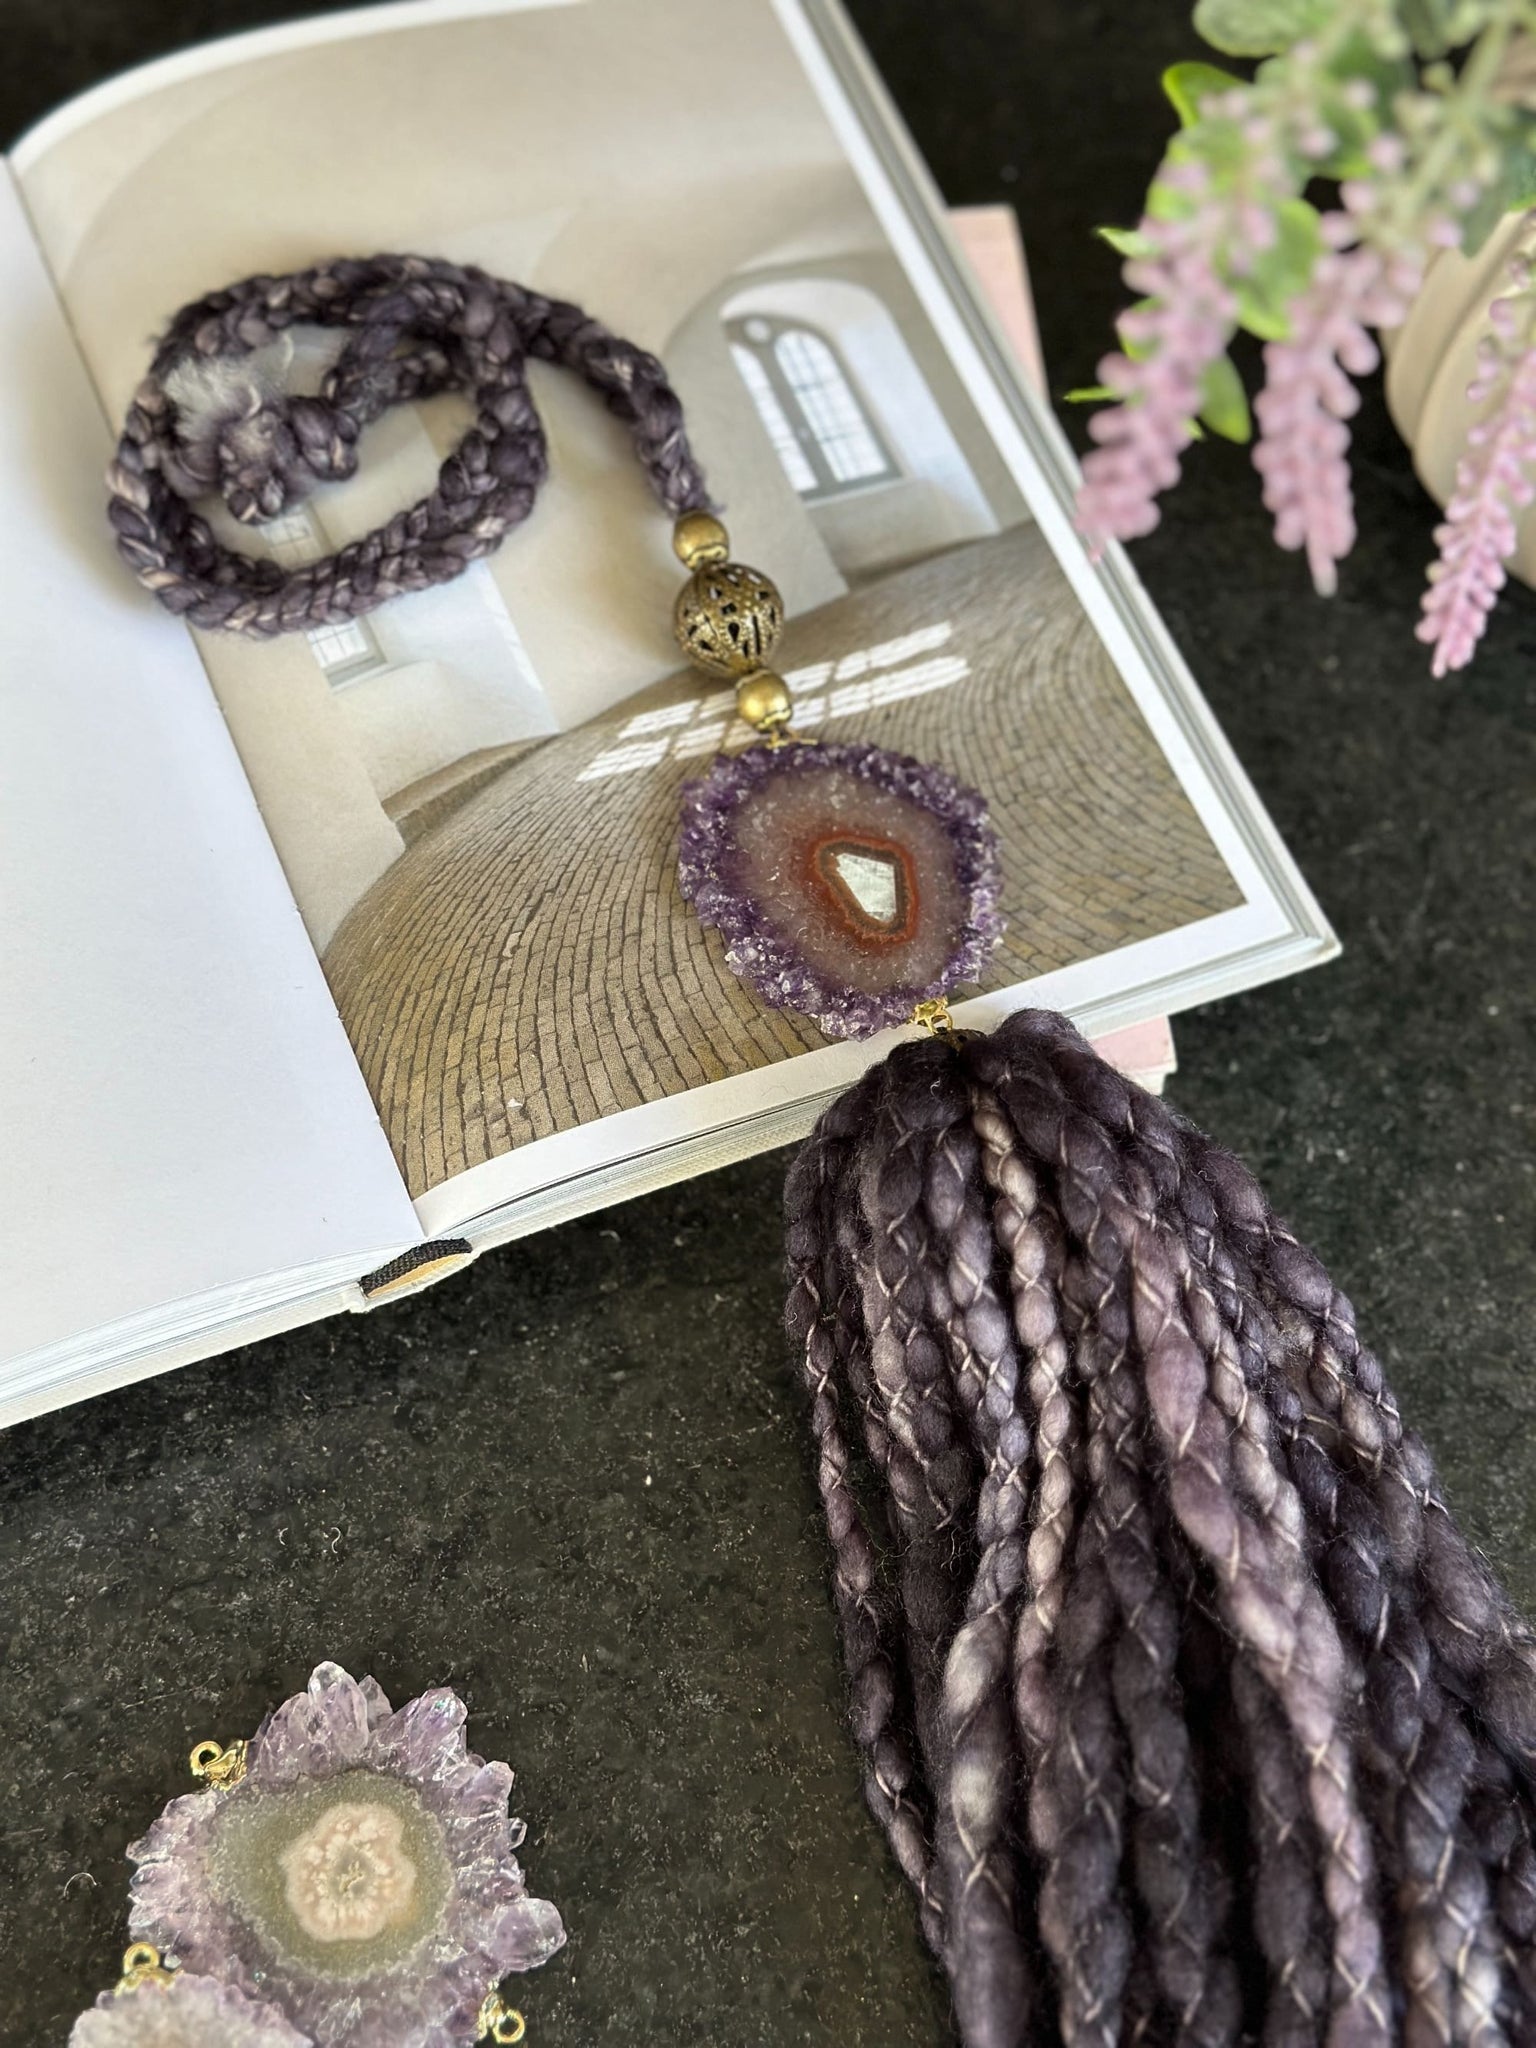 Wool Tassels with Amethyst Crystal Stalactite for Boho Decoration, Wall Hanging Tassels, Natural Merino Wool and Crystals Garland